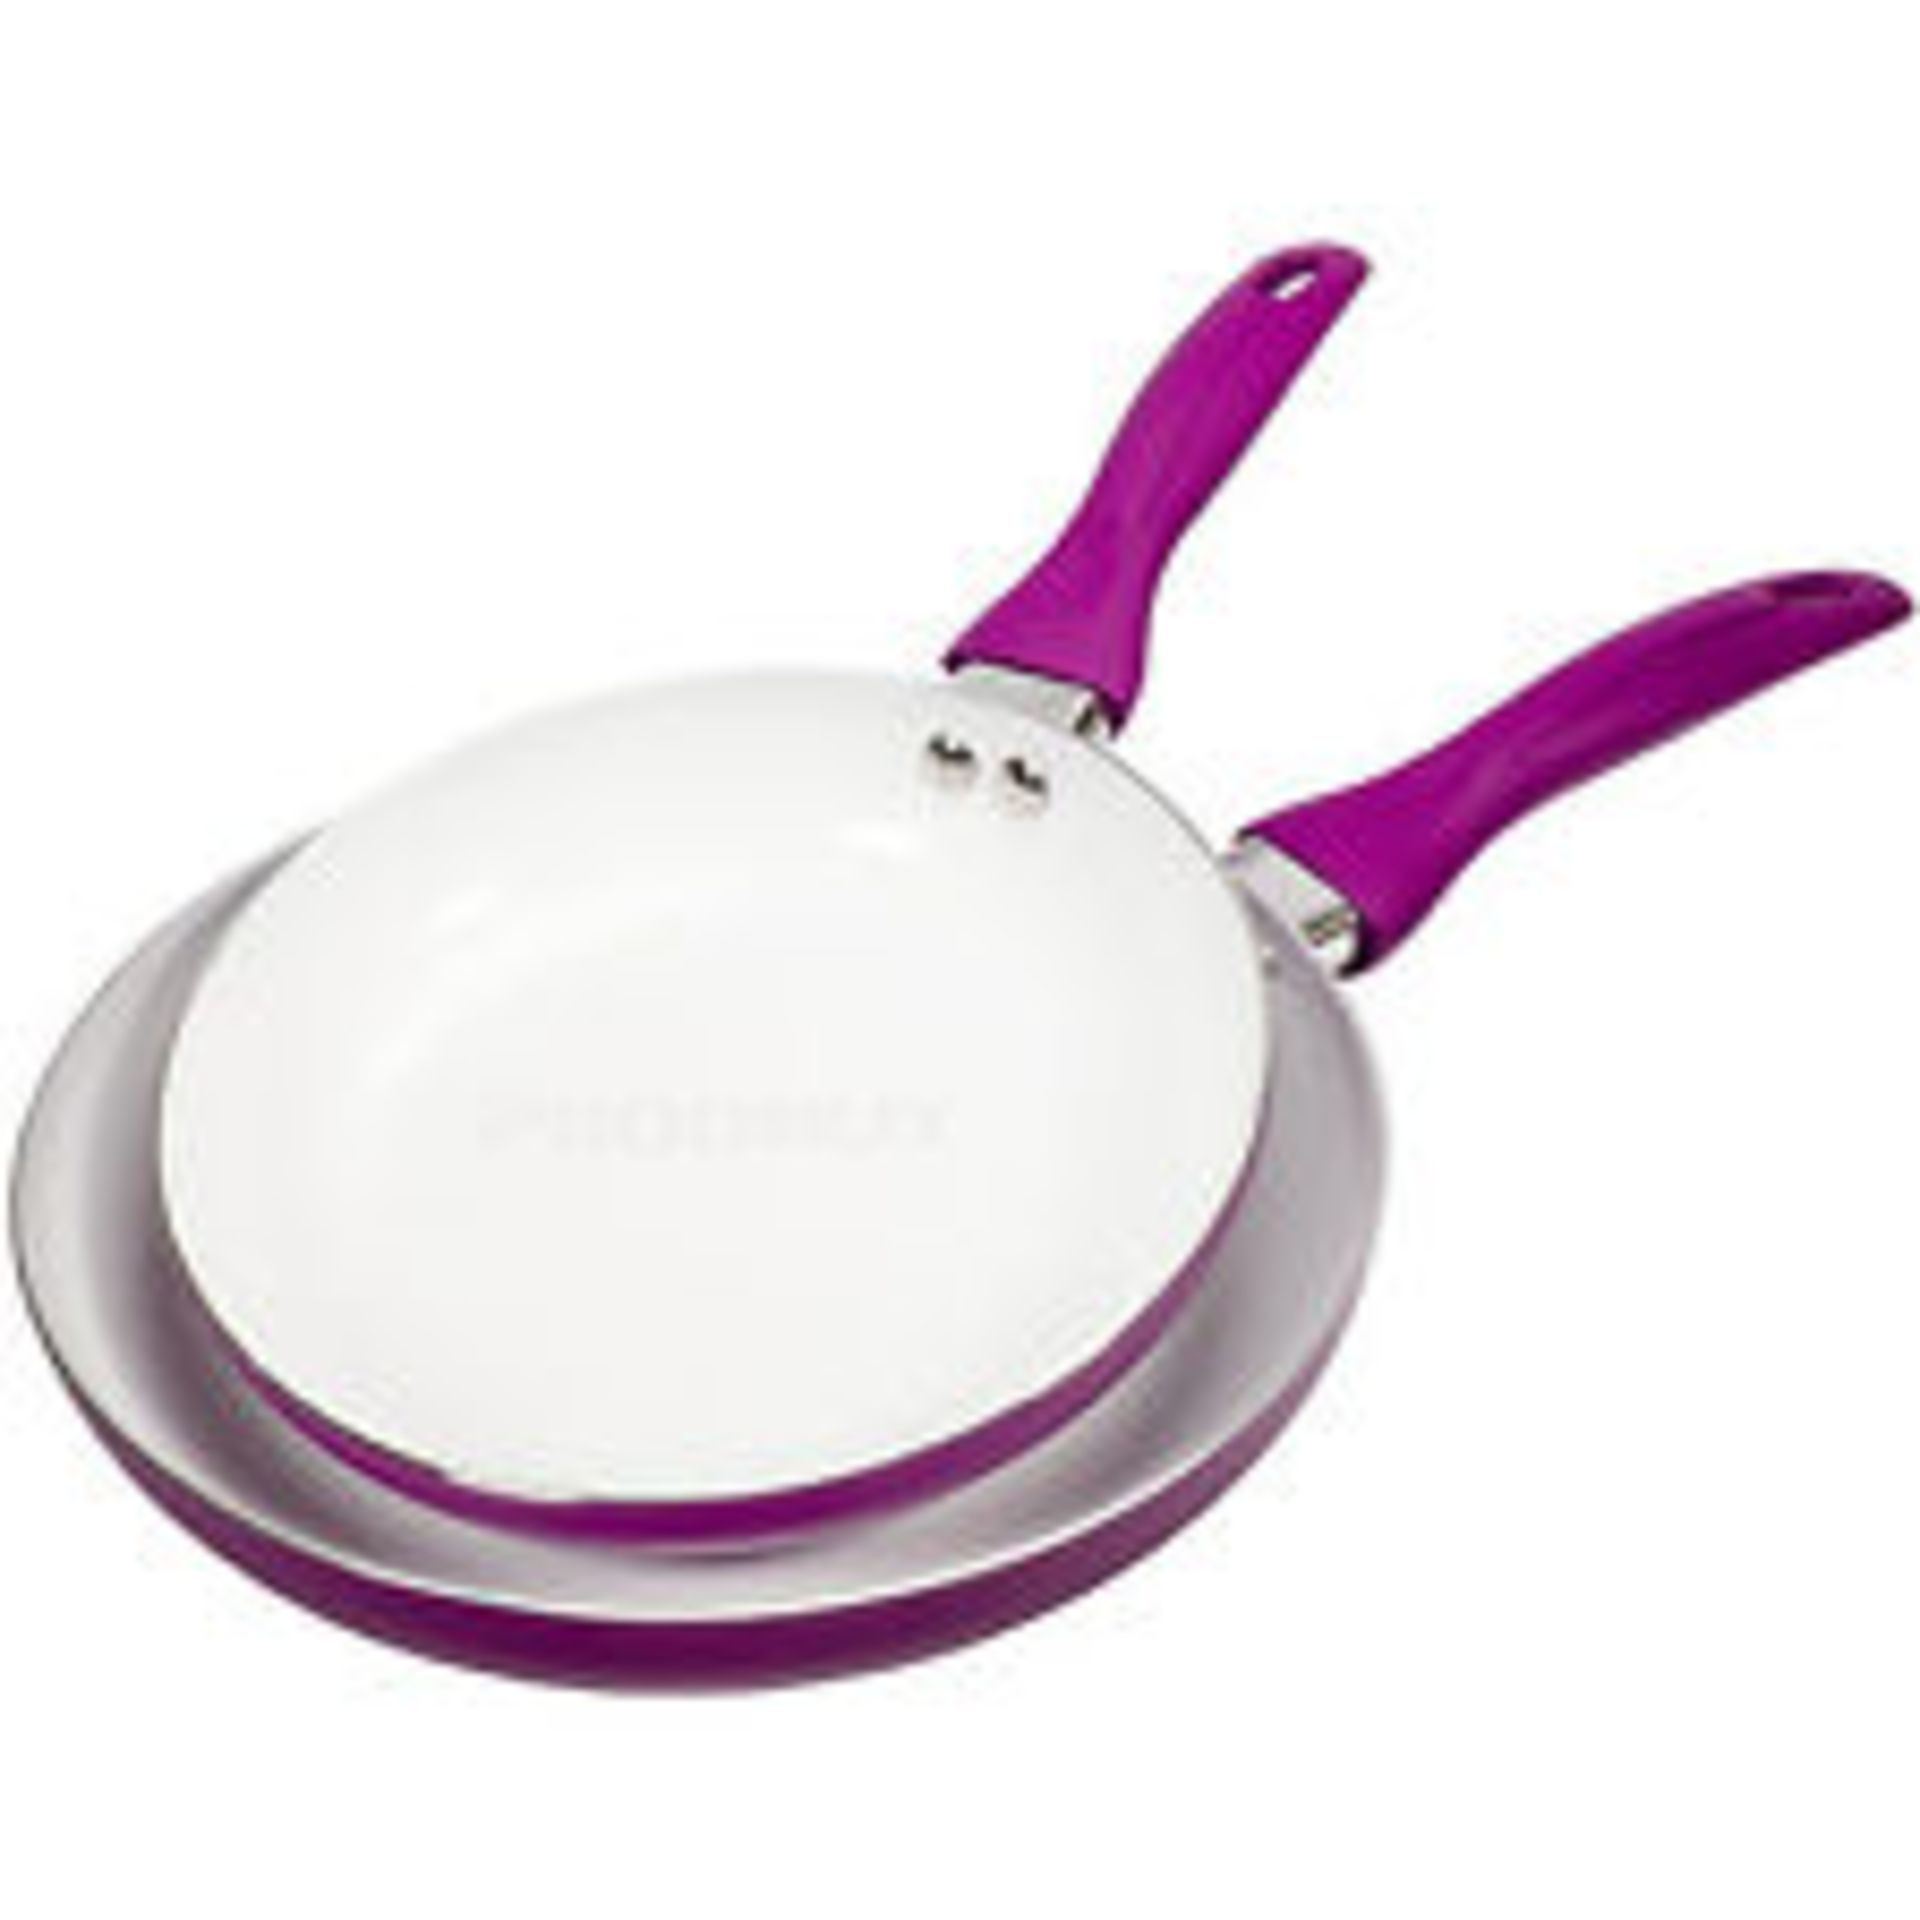 V *TRADE QTY* Brand New Set Of Two Colour Changing Frying Pans (Purple) Changes Colour At Optimum